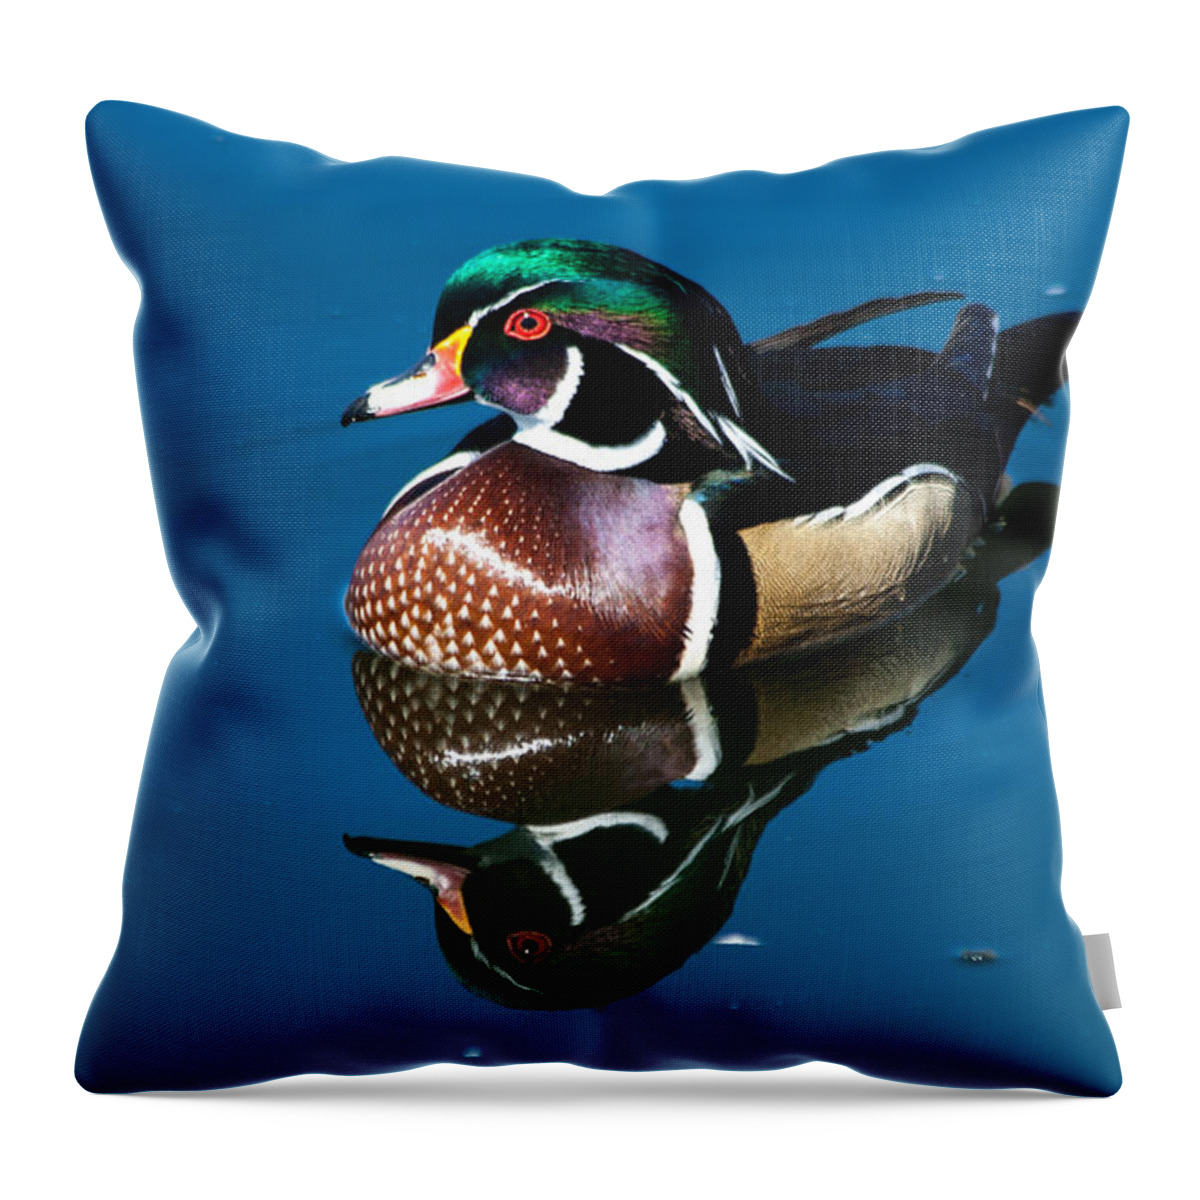 Wood Duck Throw Pillow featuring the photograph Male Wood Duck by Mindy Musick King